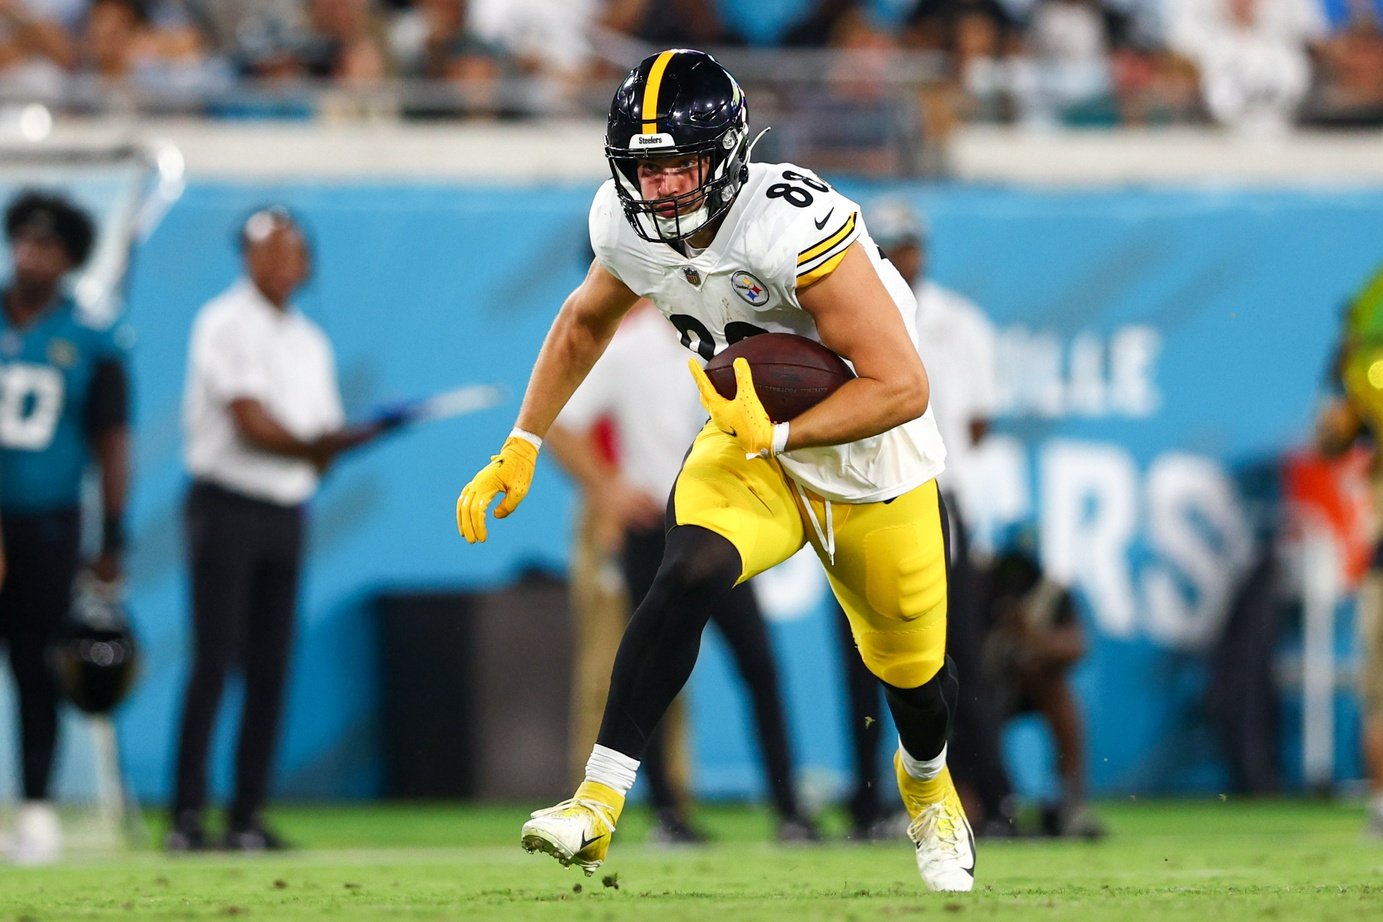 Pat Freiermuth (88) runs with the ball against the Jacksonville Jaguars in the second quarter at TIAA Bank Field.